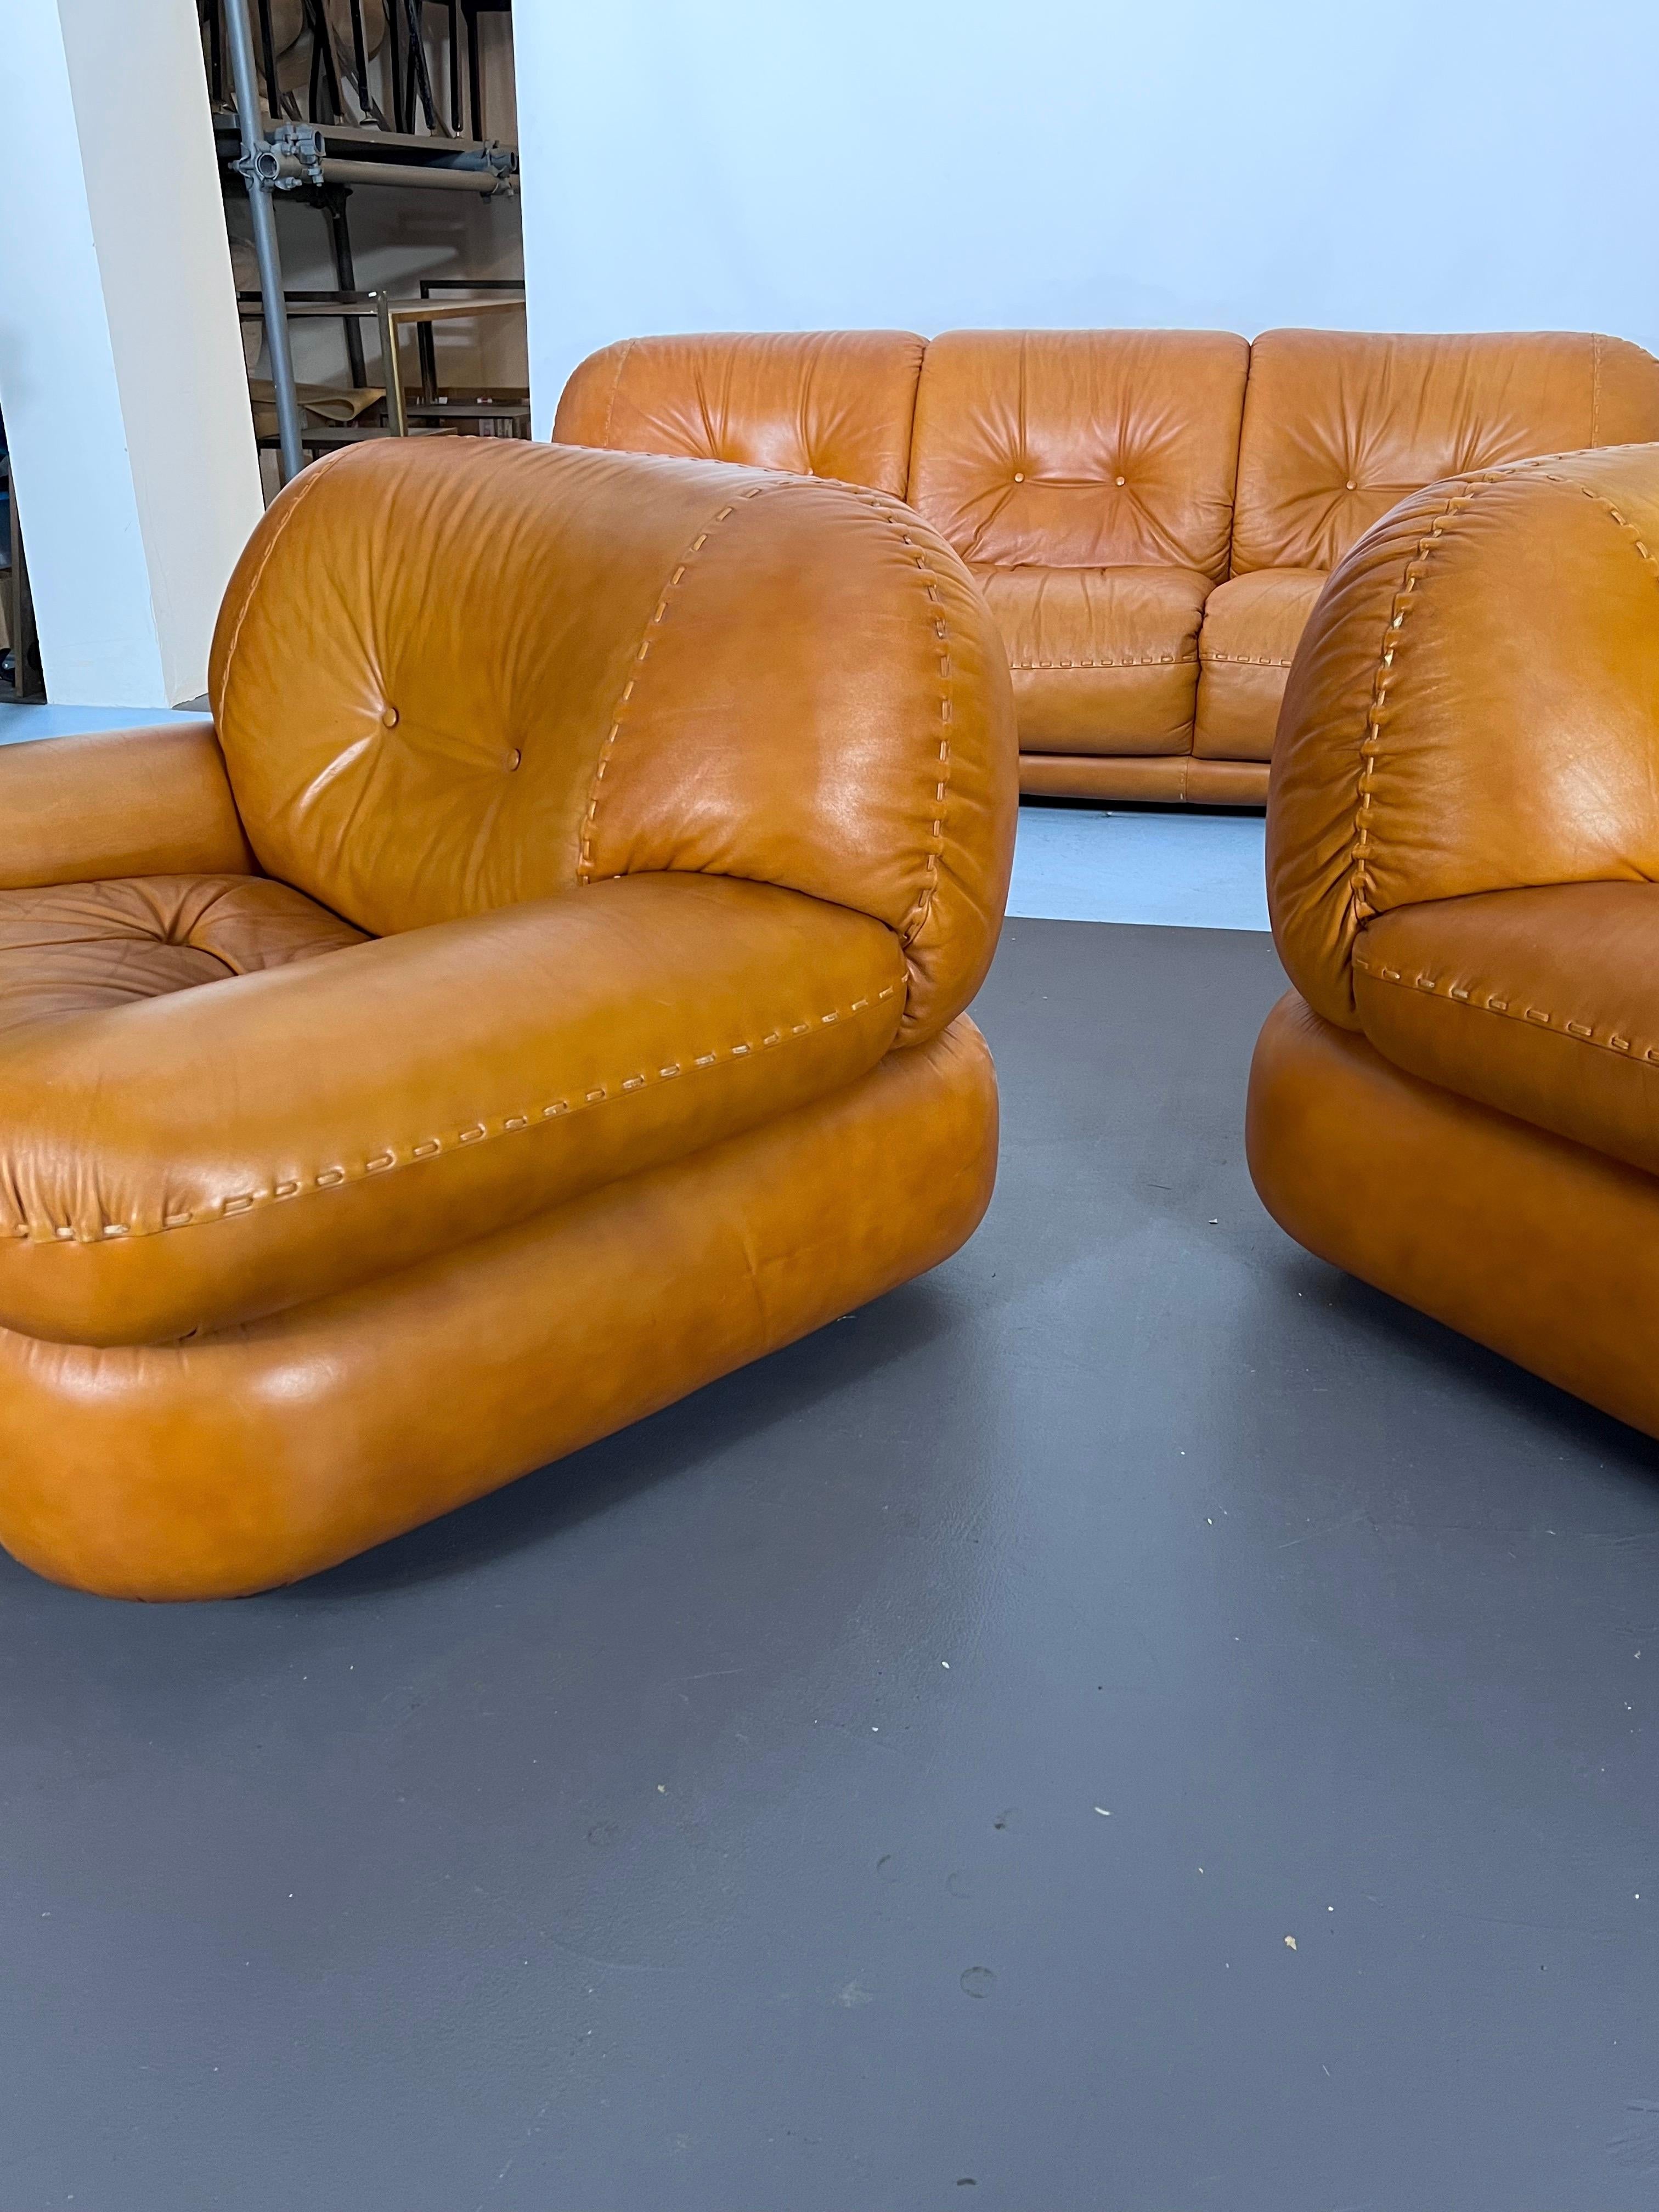 Vintage Sofa Set in Cognac Leather by Sapporo for Mobil Girgi, Italy, 1970s For Sale 2